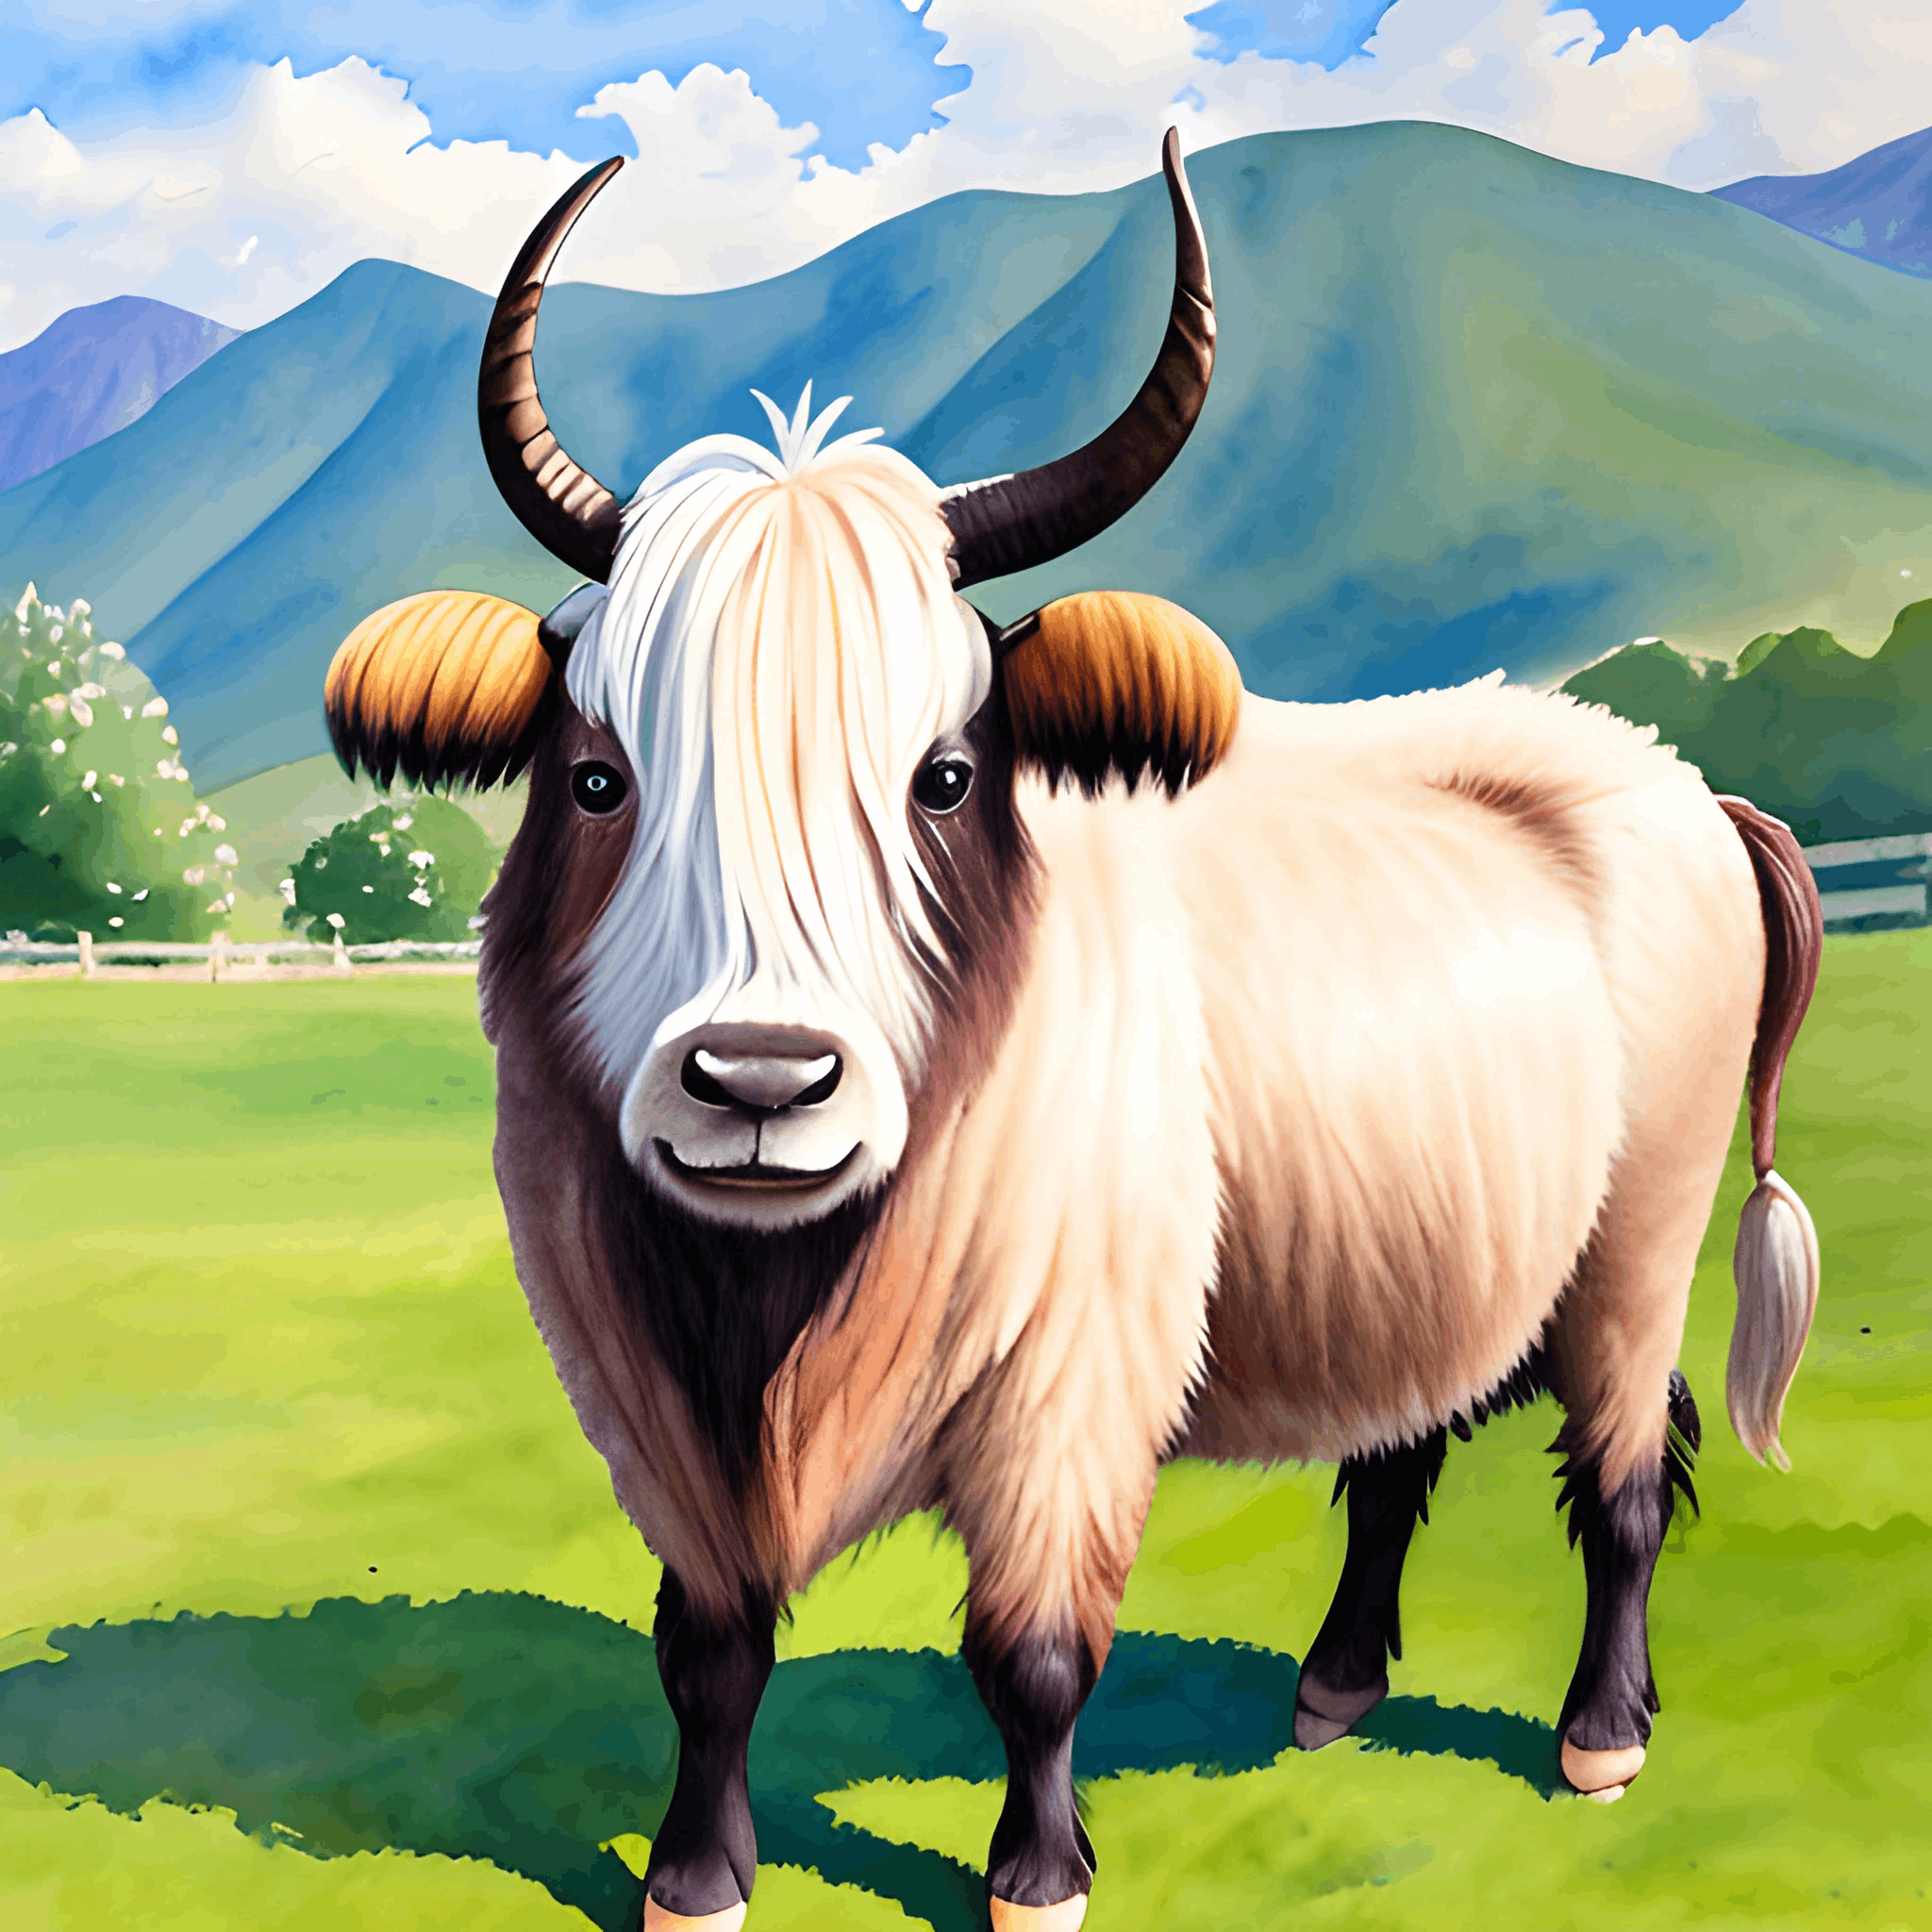 painting of a cow with horns standing in a field with mountains in the background